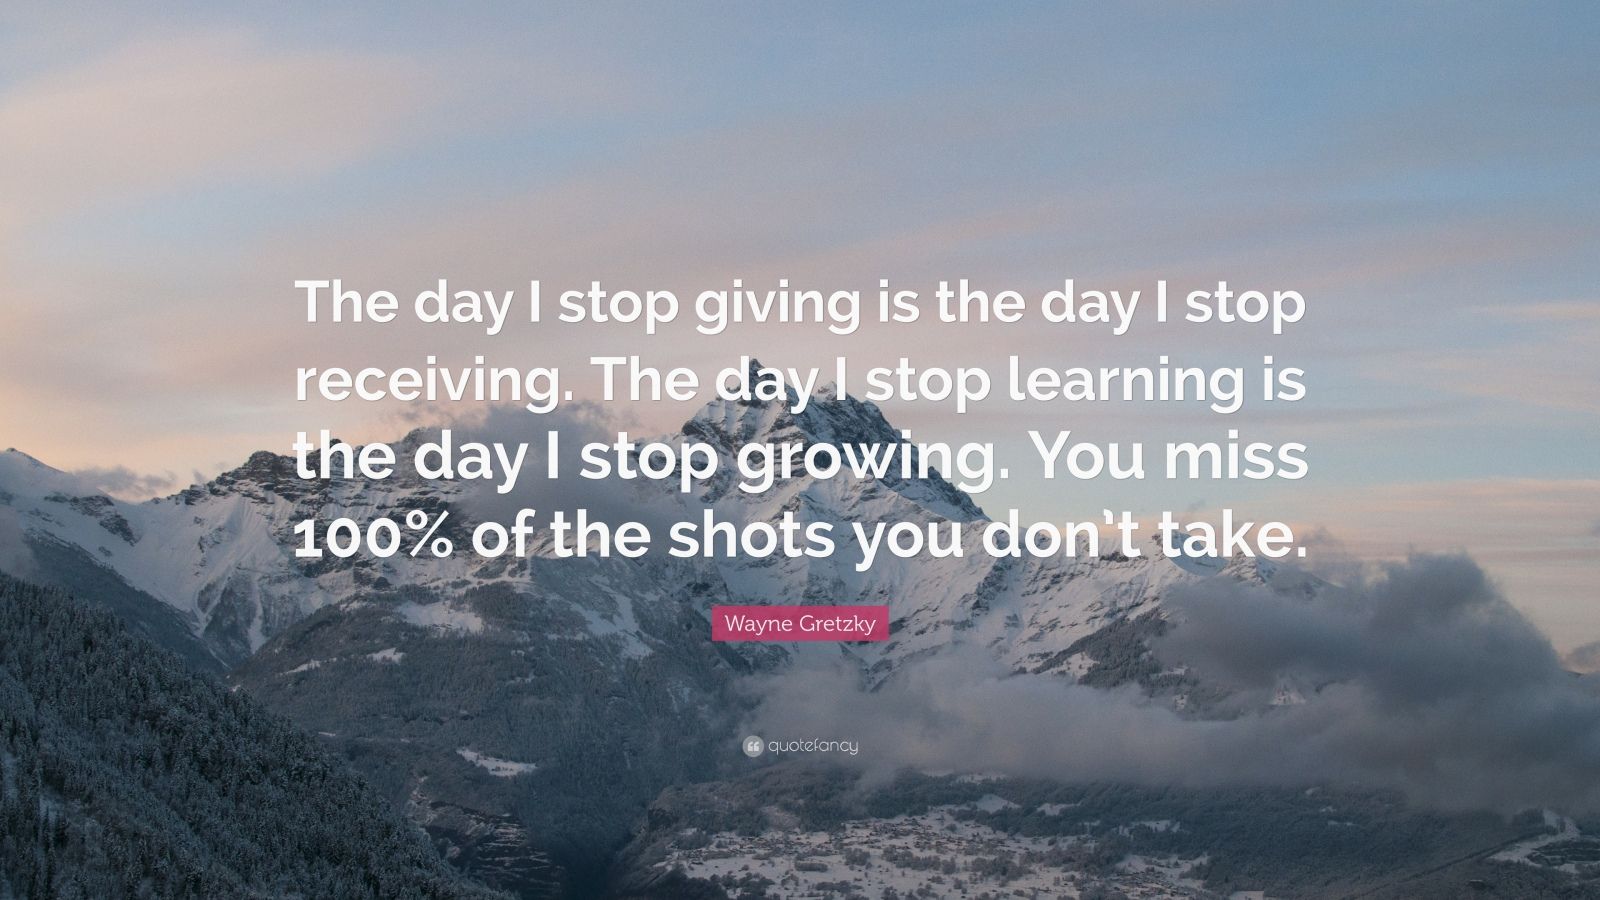 1948445 Wayne Gretzky Quote The day I stop giving is the day I stop